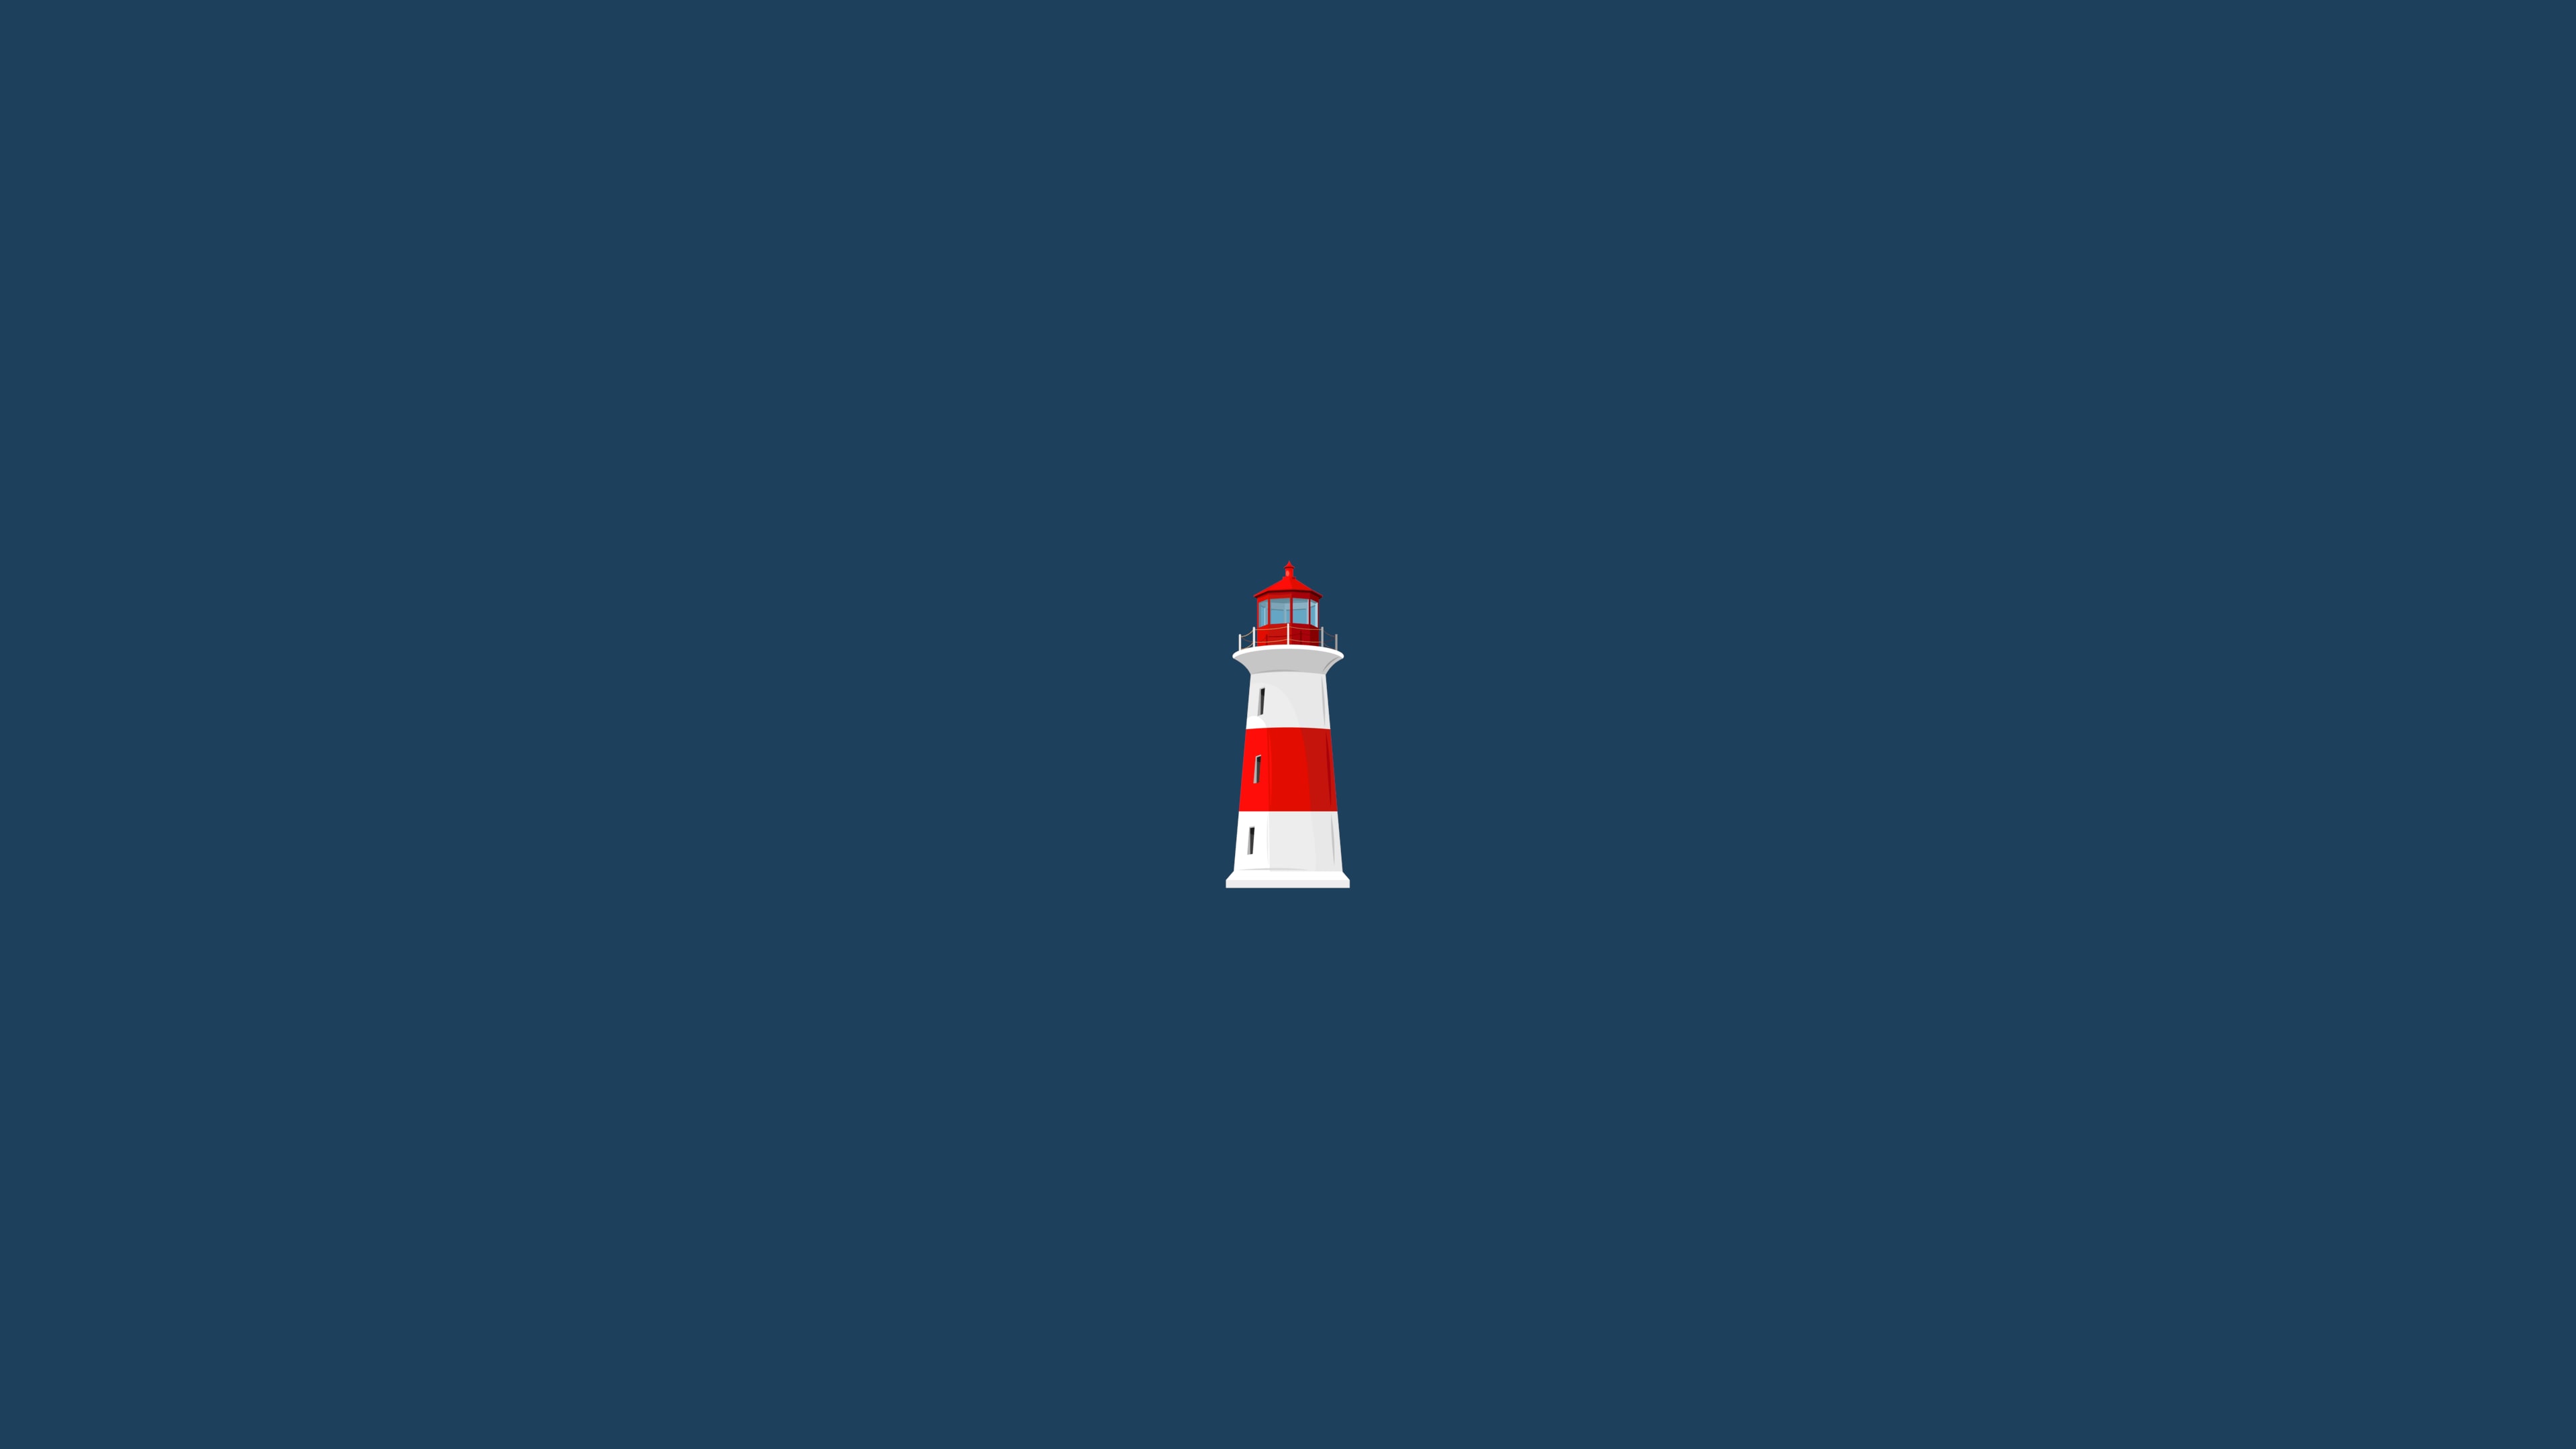 Spin the Lighthouse